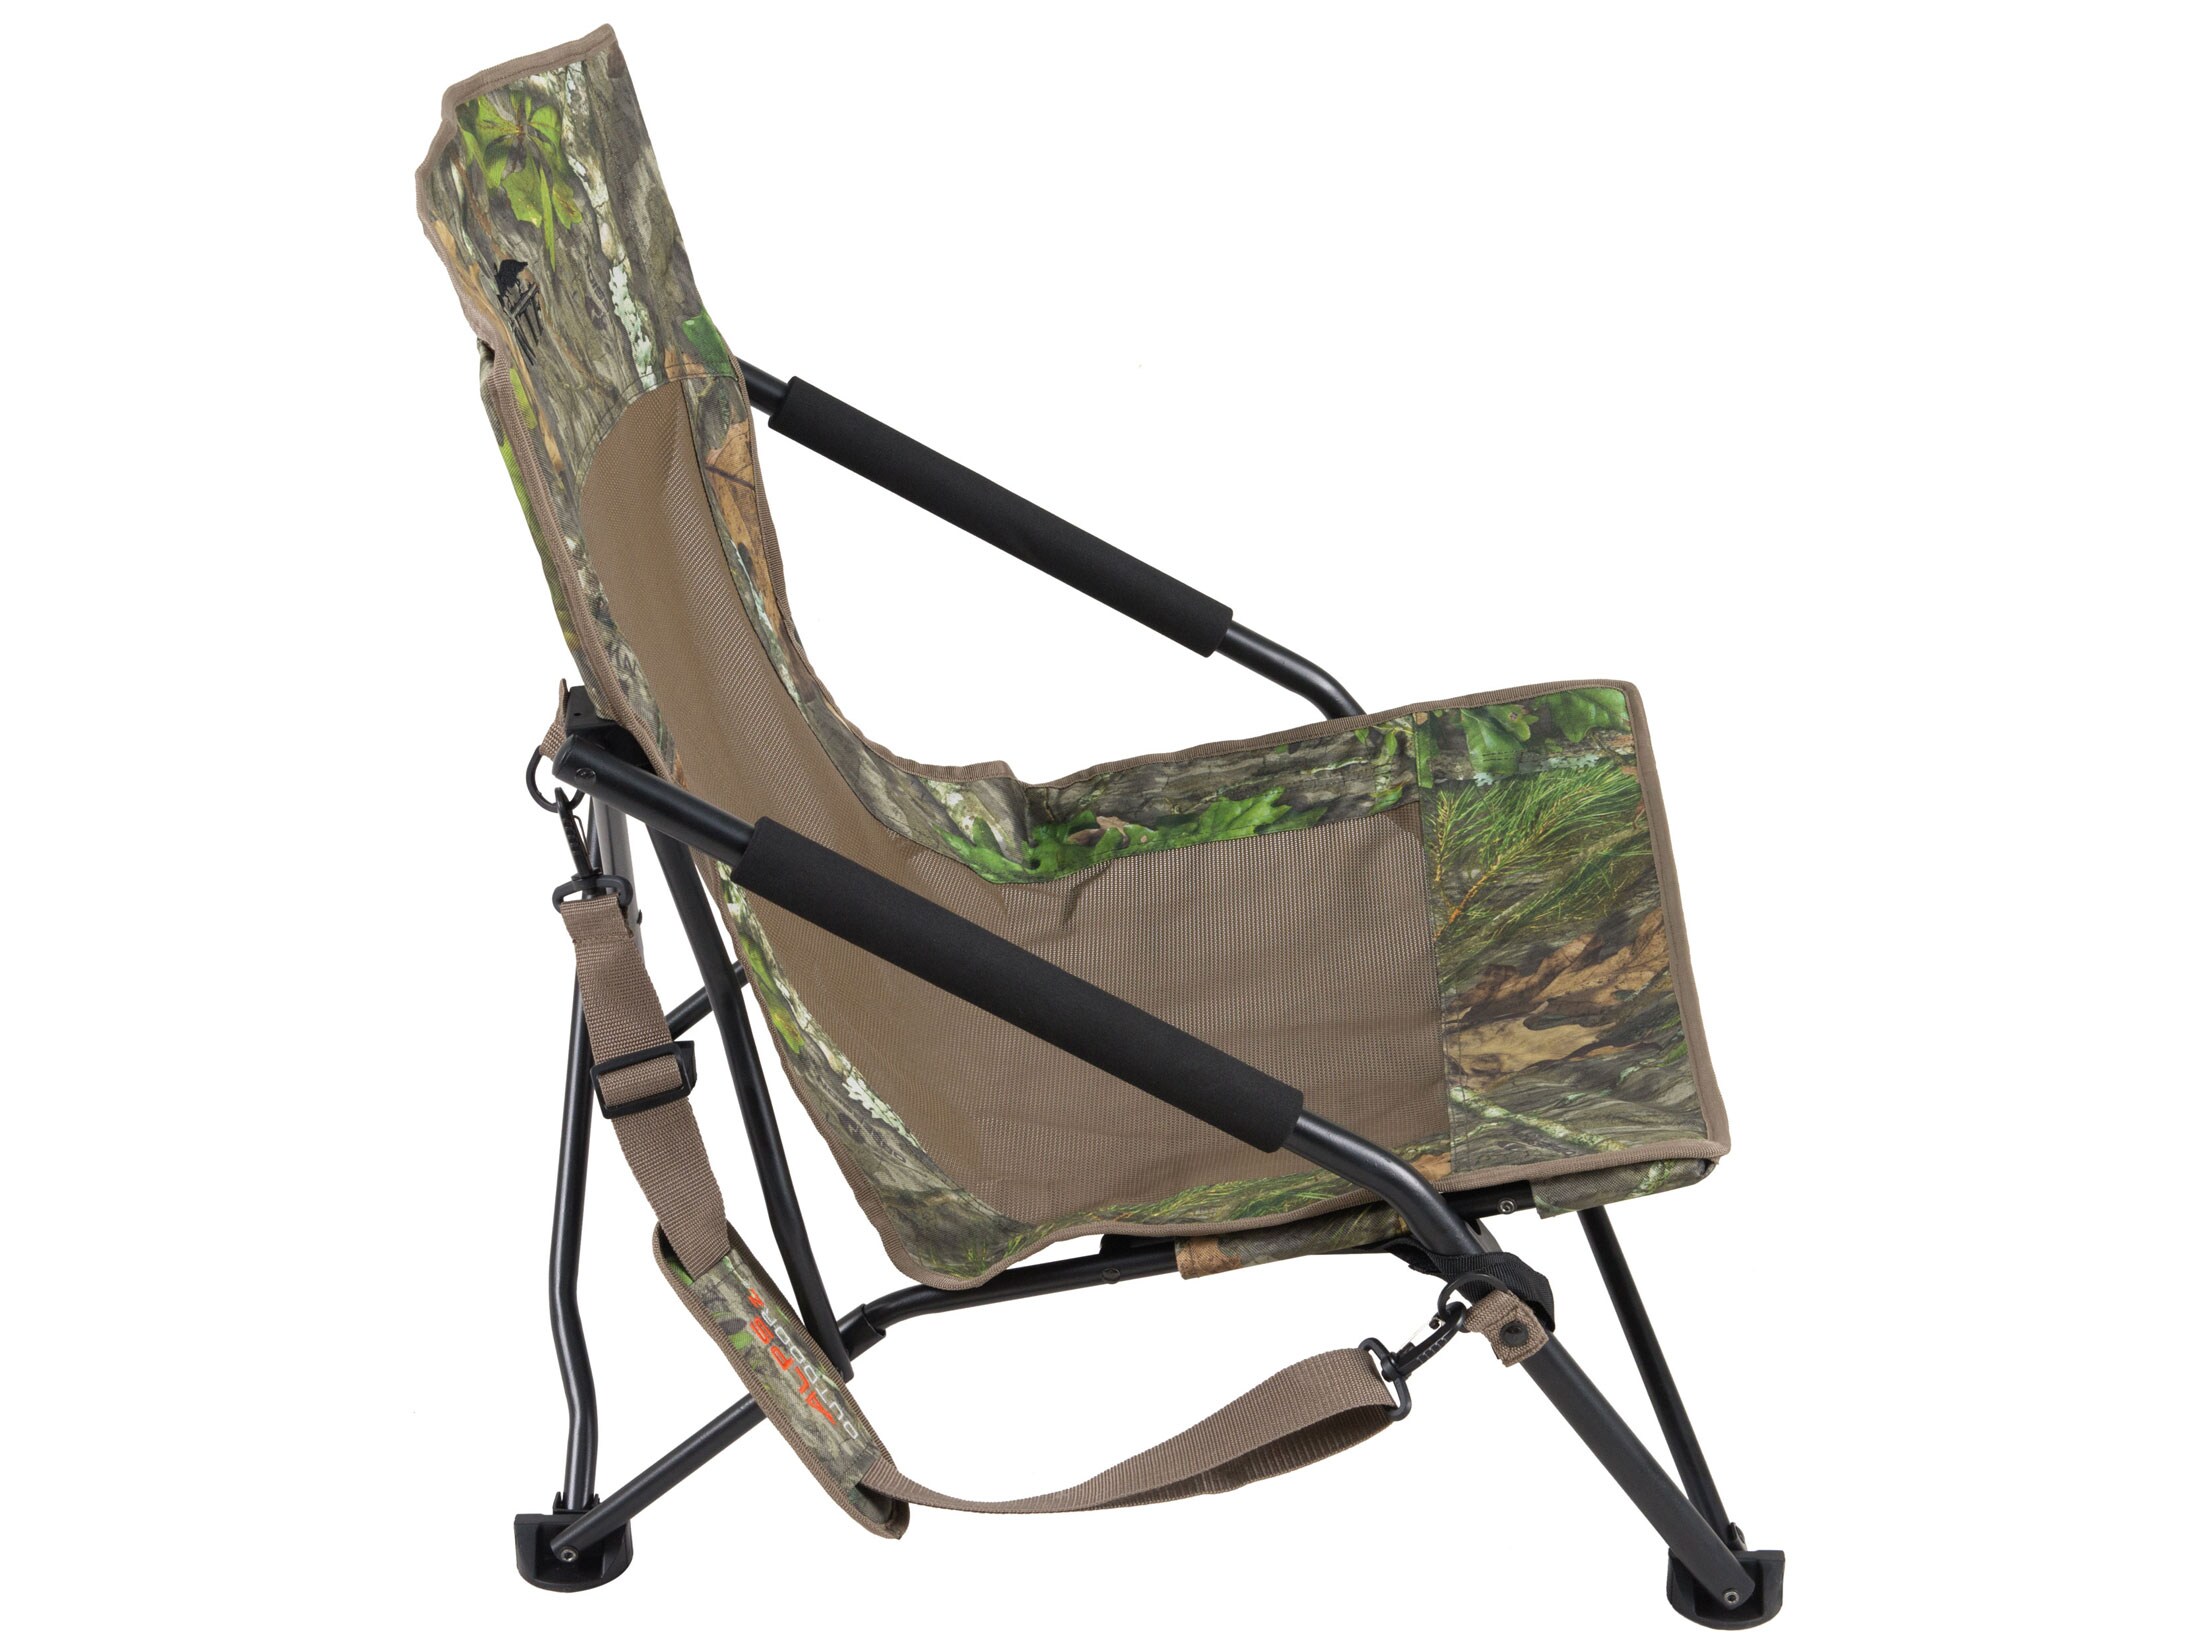 ALPS OutdoorZ NWTF Turkey Chair Hunting & Fishing Seats